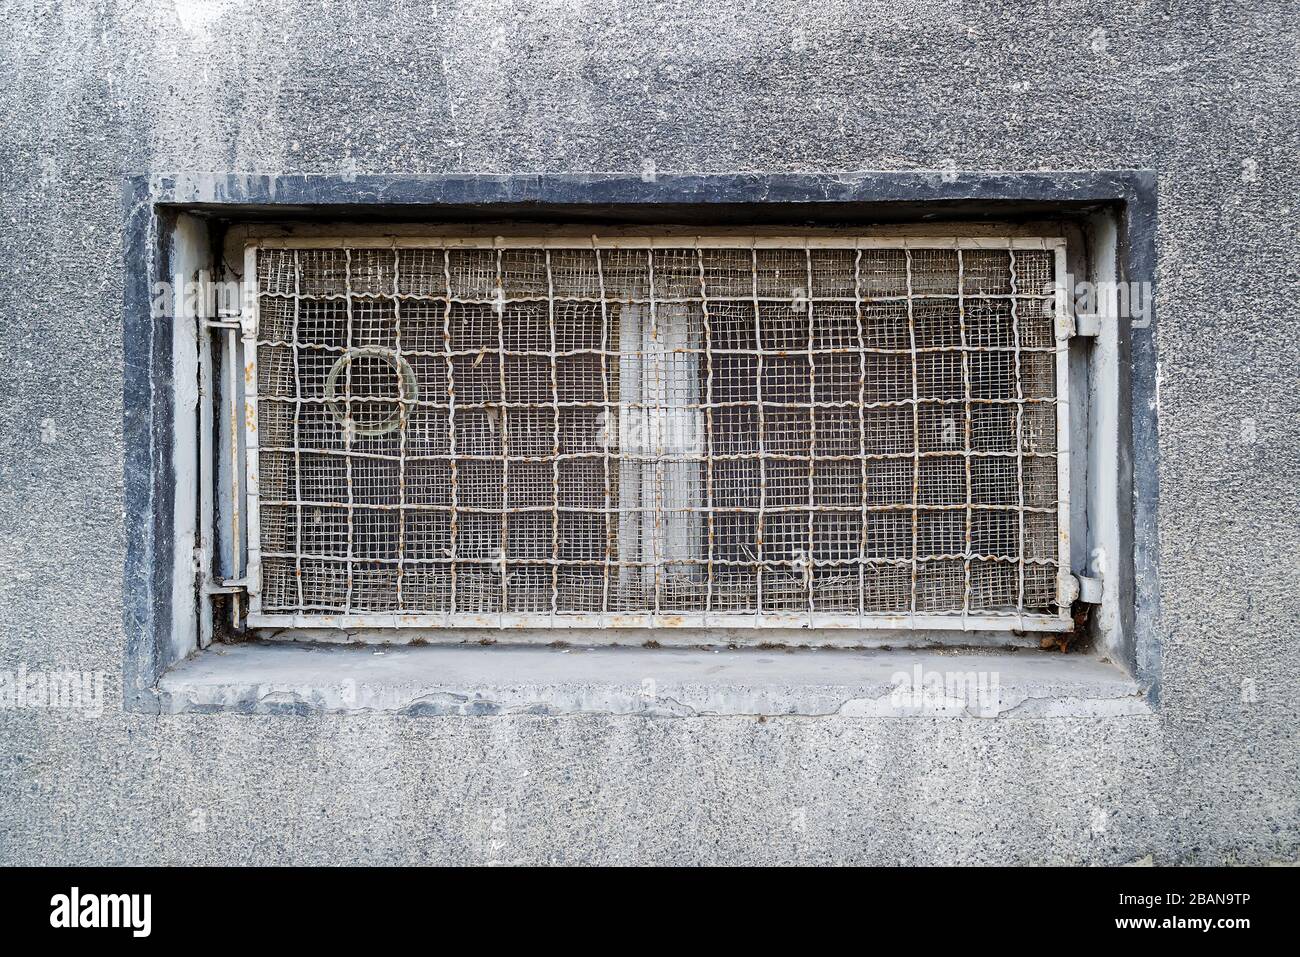 Rectangular basement or cellar window is tightened with wire metal mesh and grille. Technical floor window in the wall of an old gray building. Stock Photo